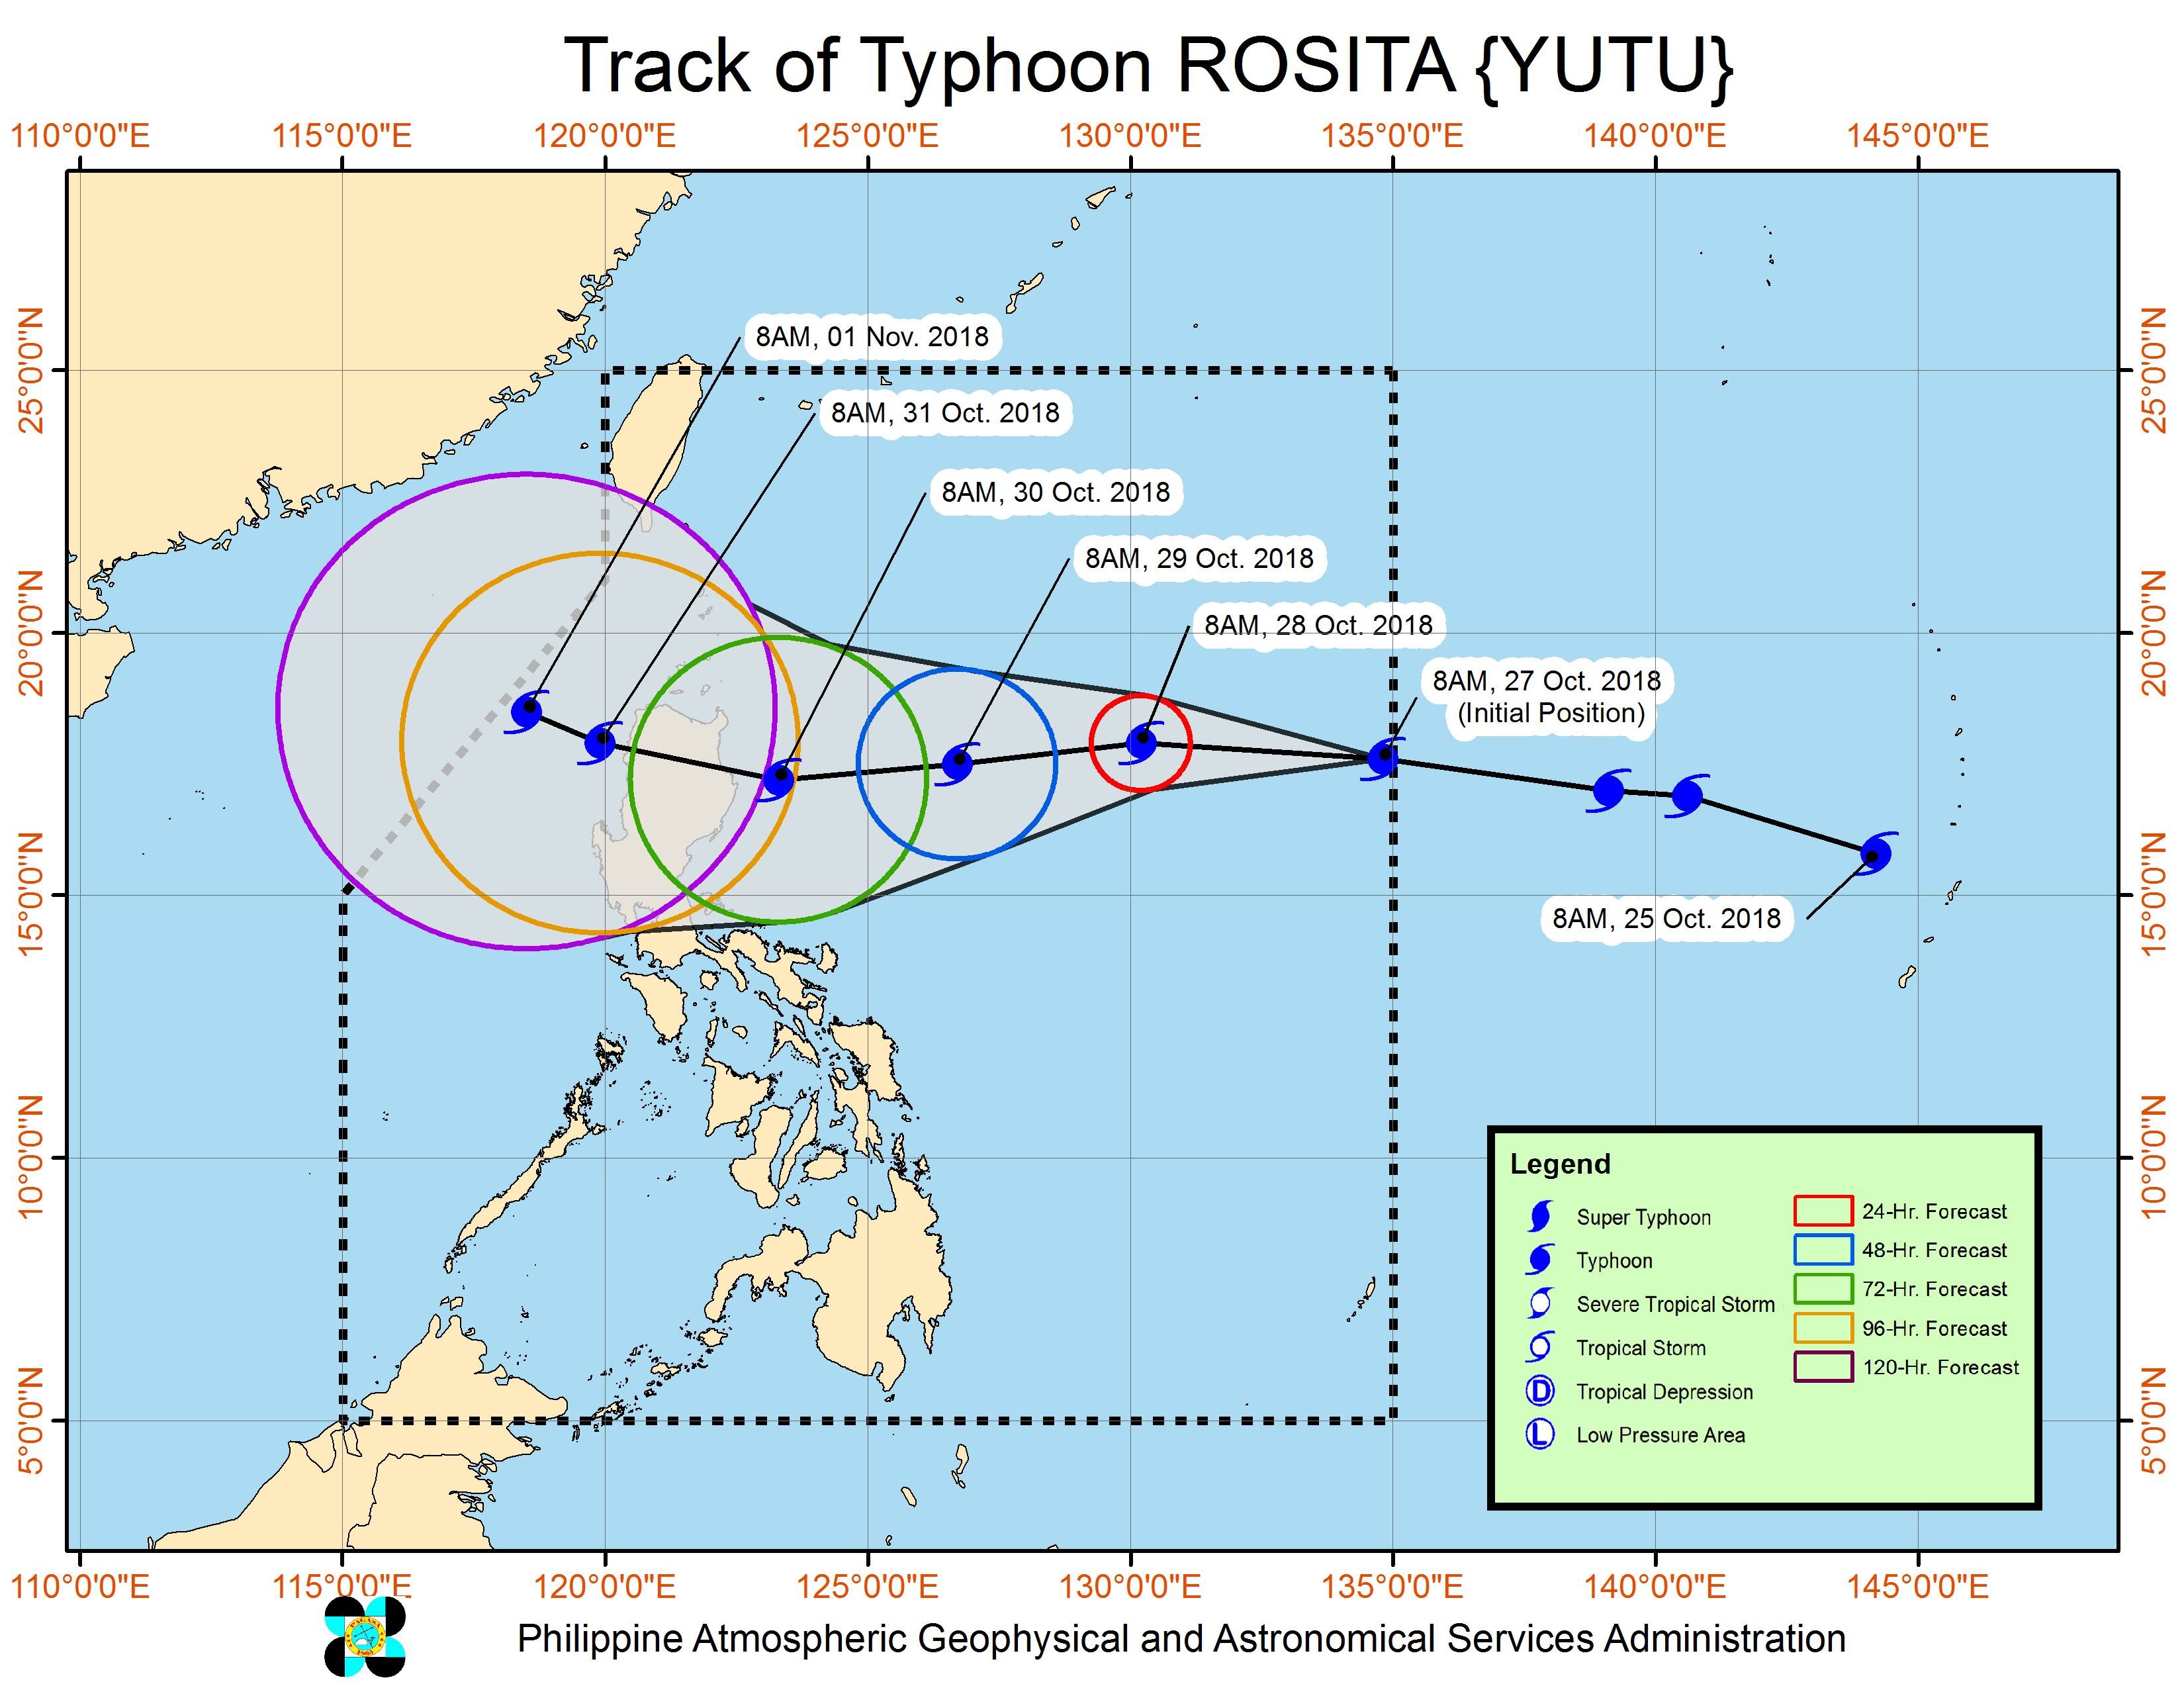 Forecast track of Typhoon Rosita (Yutu) as of October 27, 2018, 11 am. Image from PAGASA 